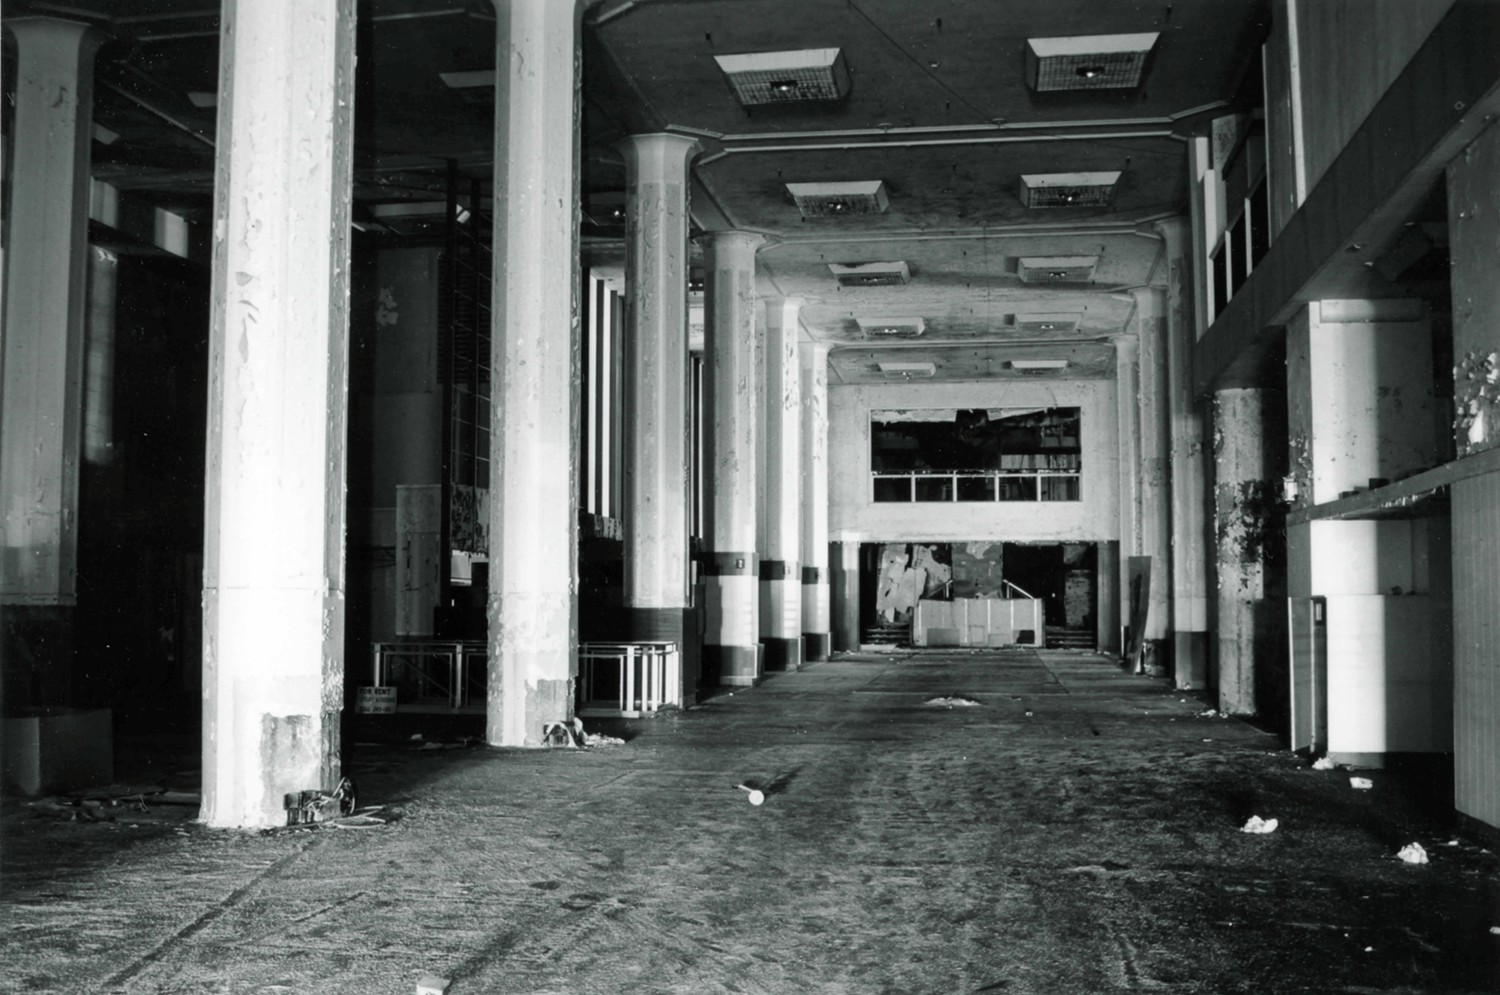 Lasalle, Koch and Company Department Store - Macys, Toledo Ohio VIEW SOUTH, THE MAIN ISLE ON THE FIRST FLOOR WITH THE ARCADE MEZZANINE (1995)